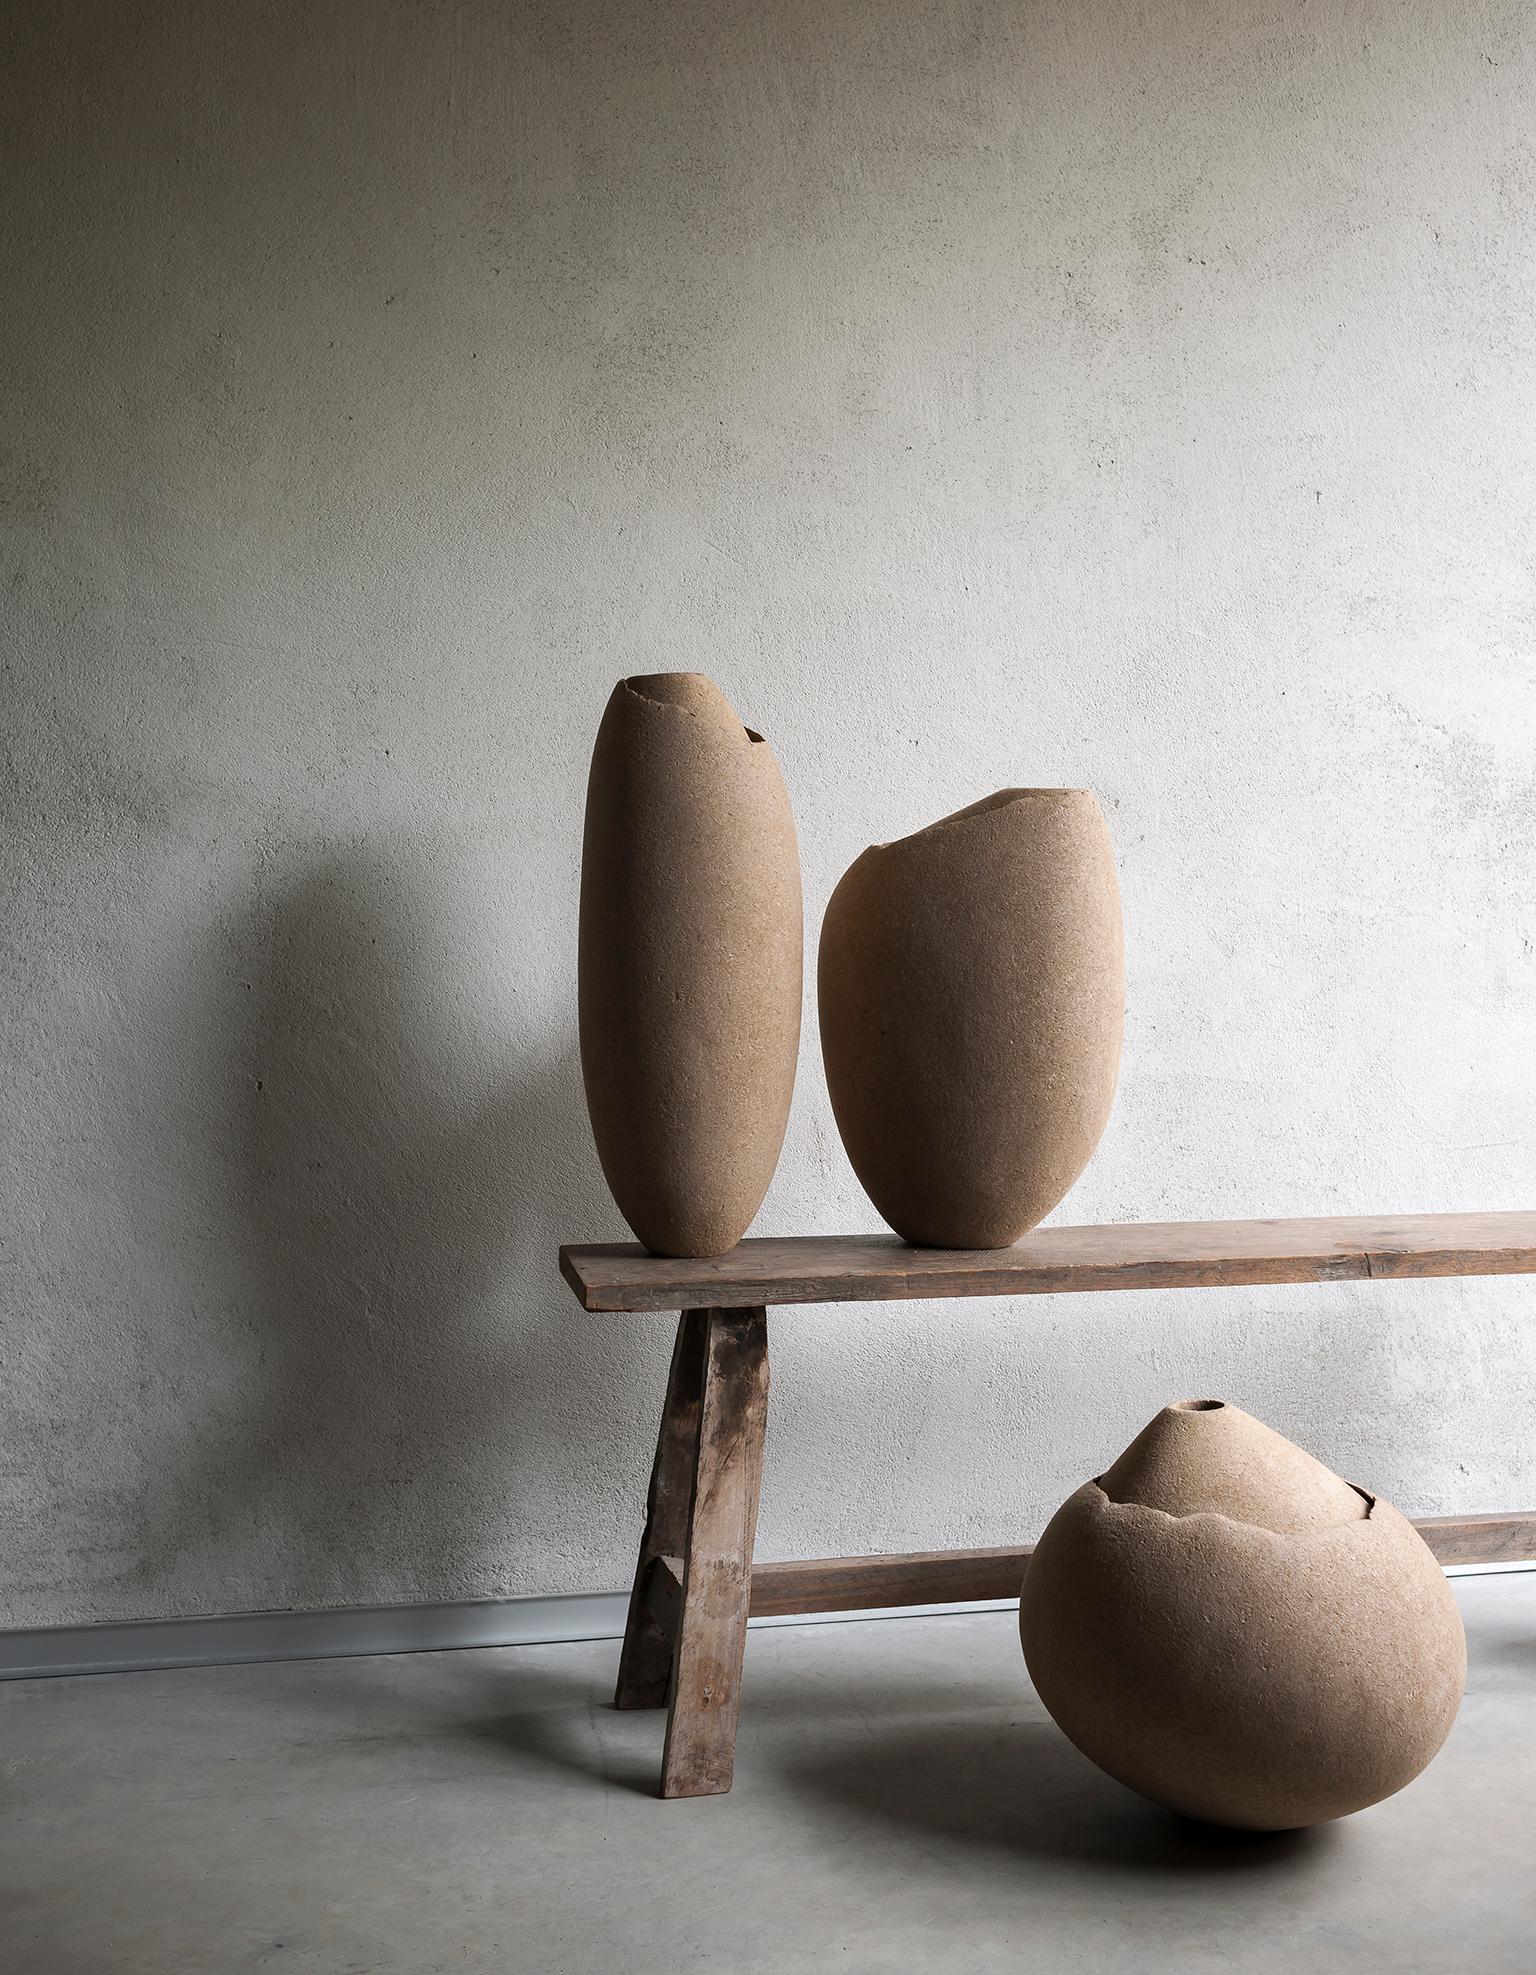 These inspired creations lie midway between art and design, defying definition. The new Mantiqueira by Domingos Tótora for Tacchini Edizioni are an original artistic encapsulation of the way nature and craftsmanship elicit a shift towards ethics.